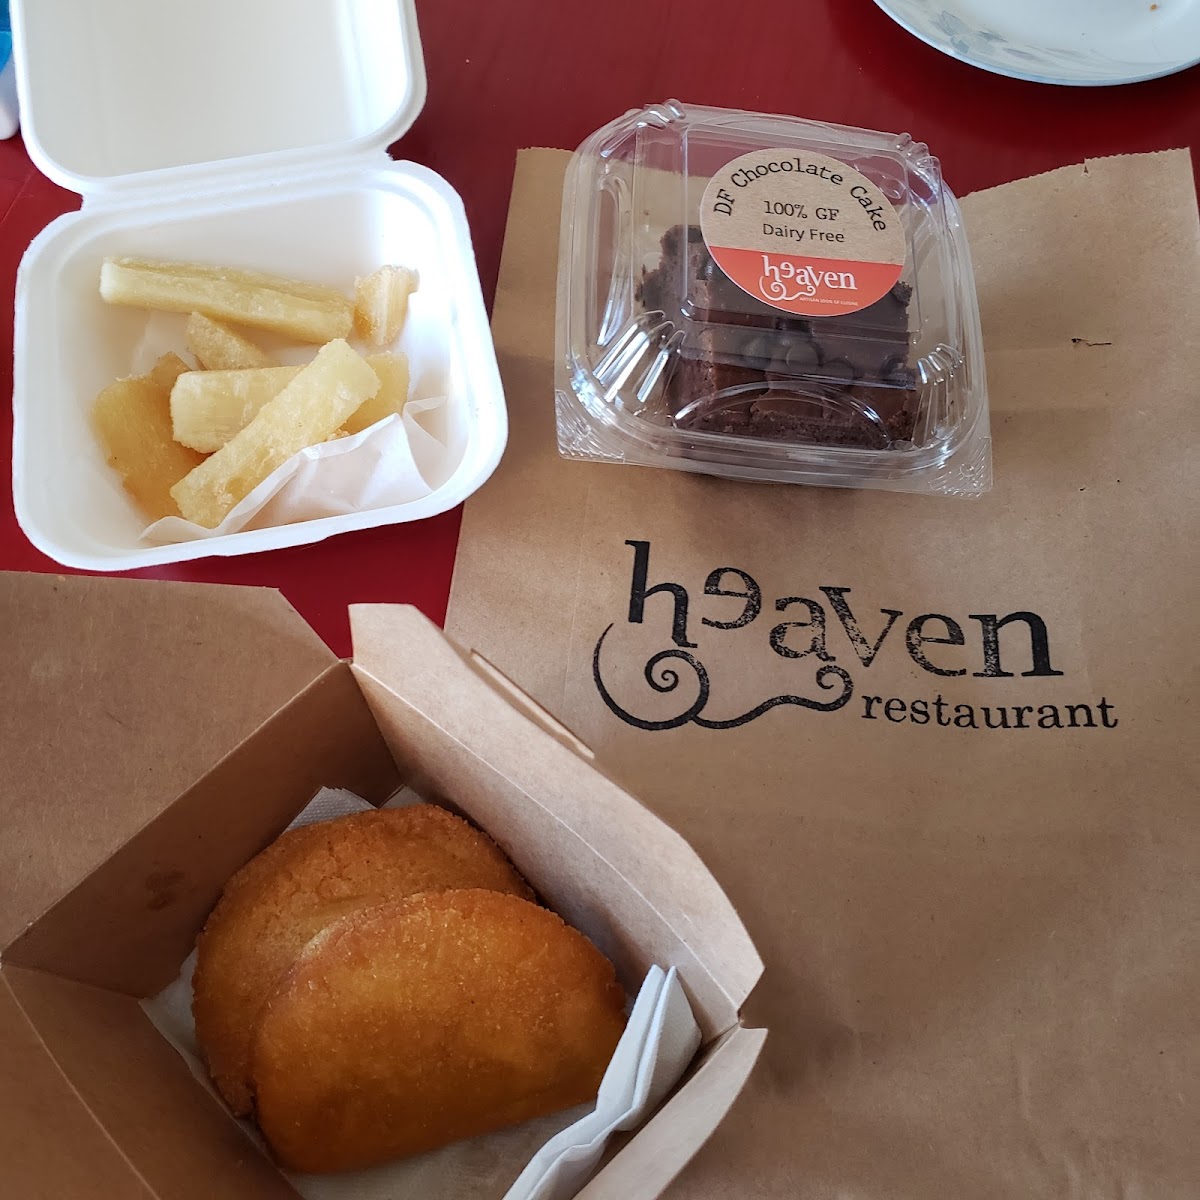 Heaven takeout. Highly recommend.